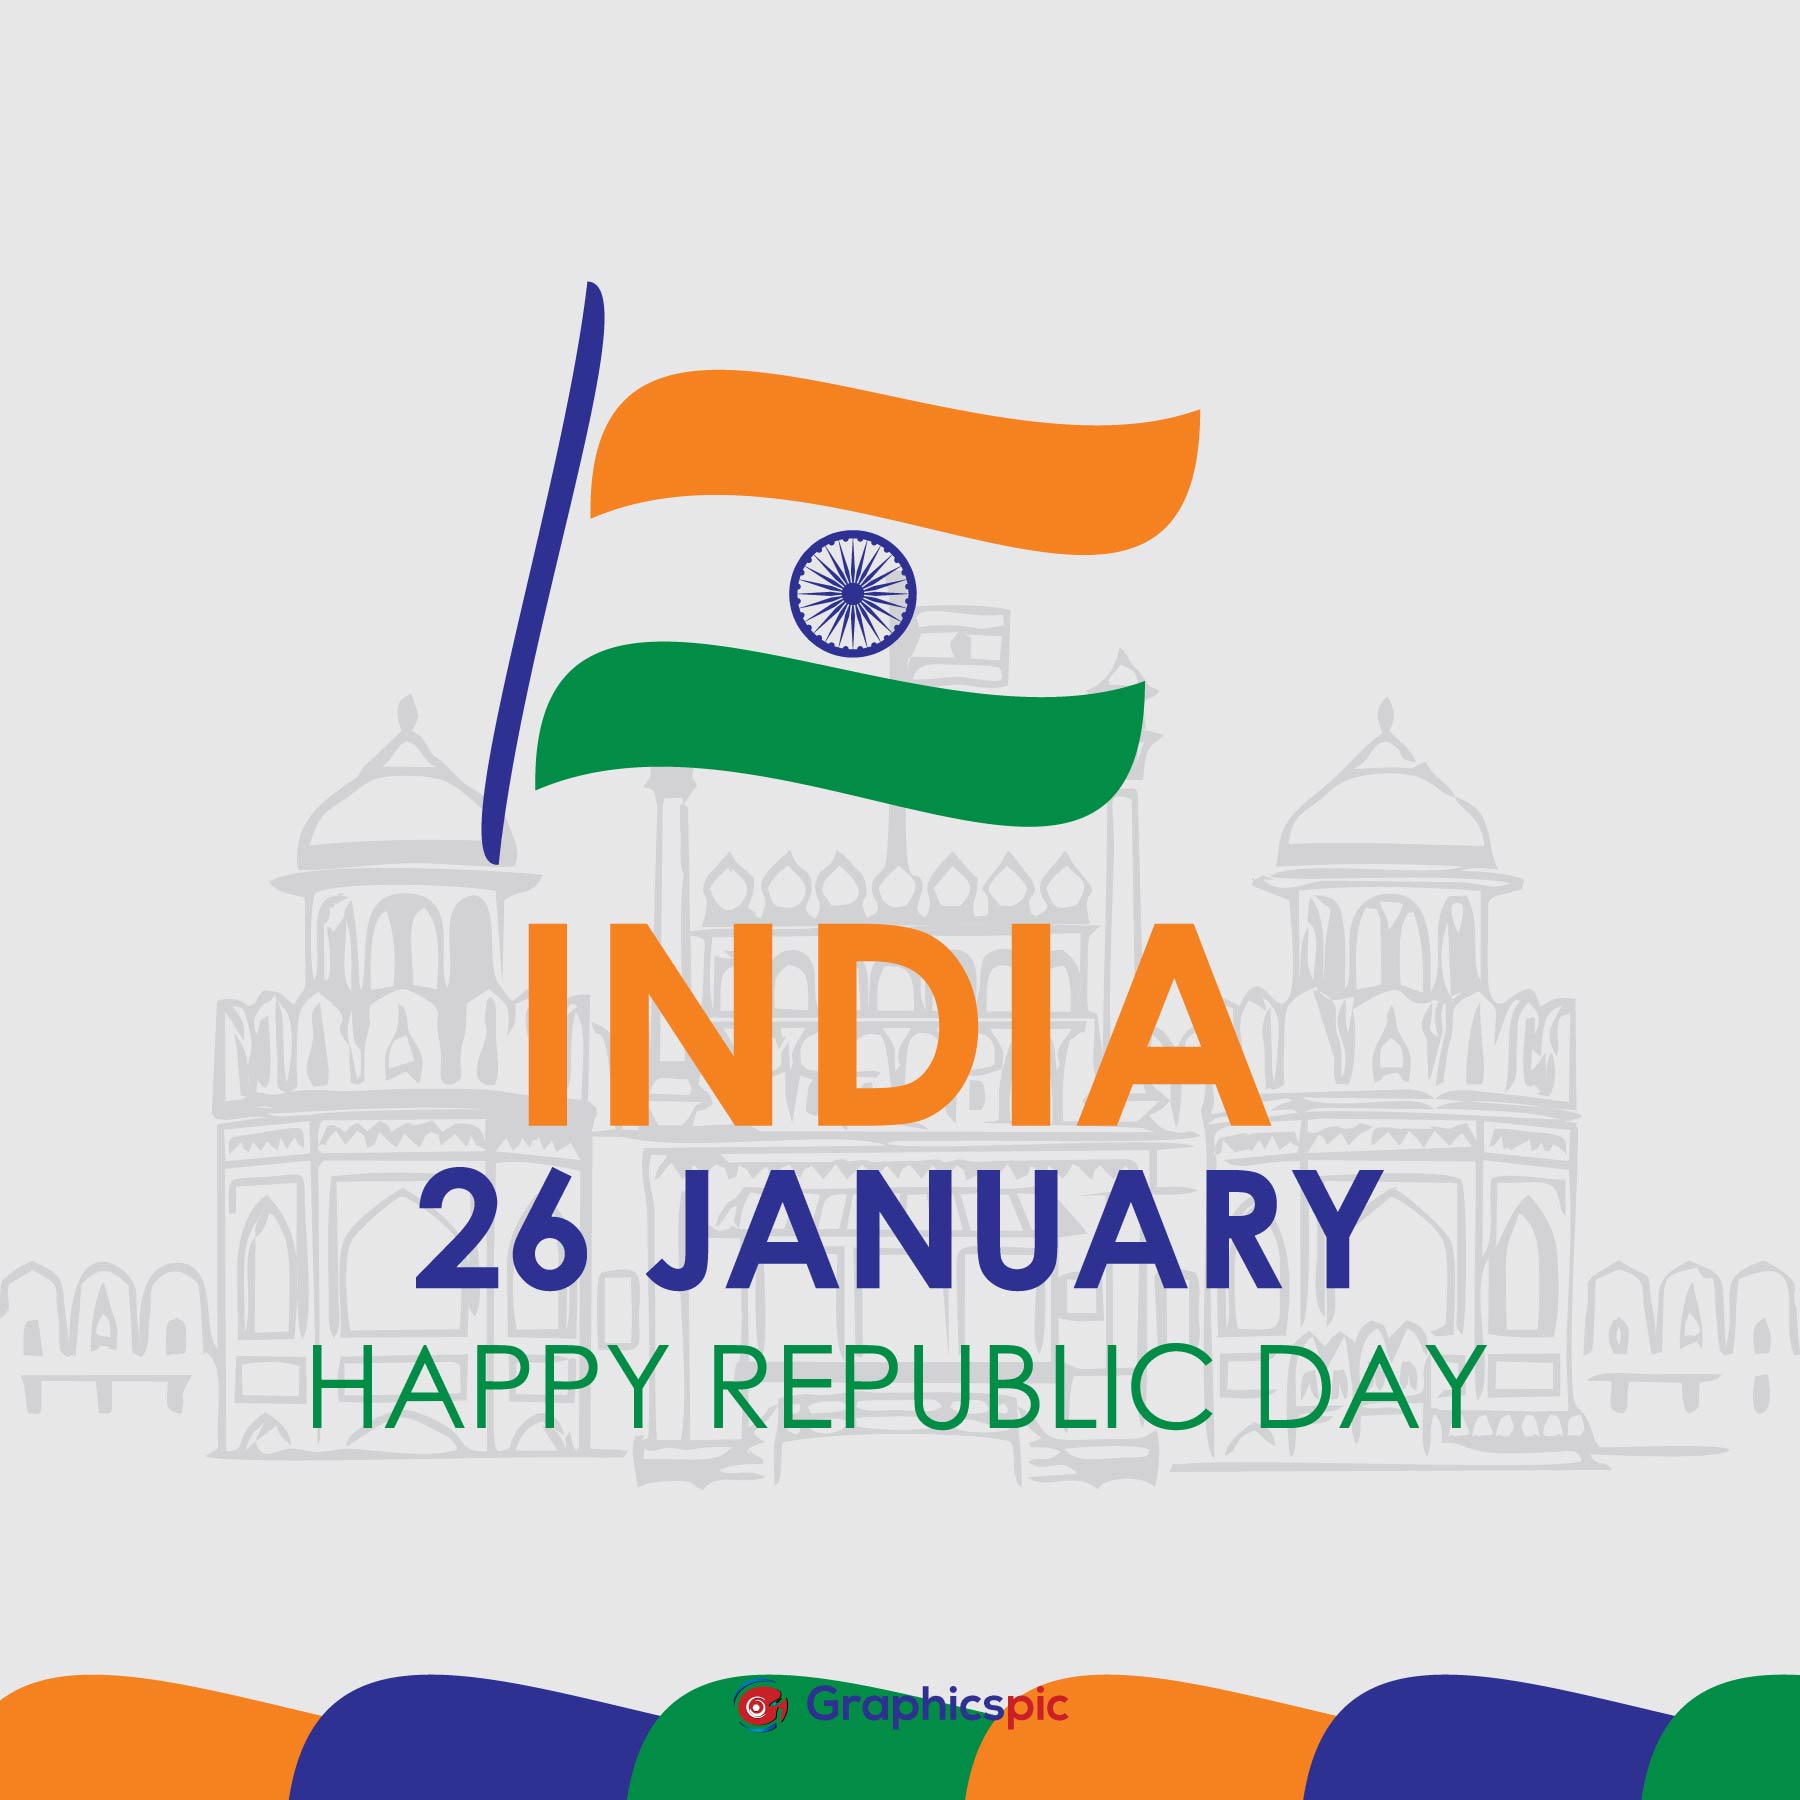 Elegant indian flag background for 26 january happy republic day  celebration image - Free Vector - Graphics Pic